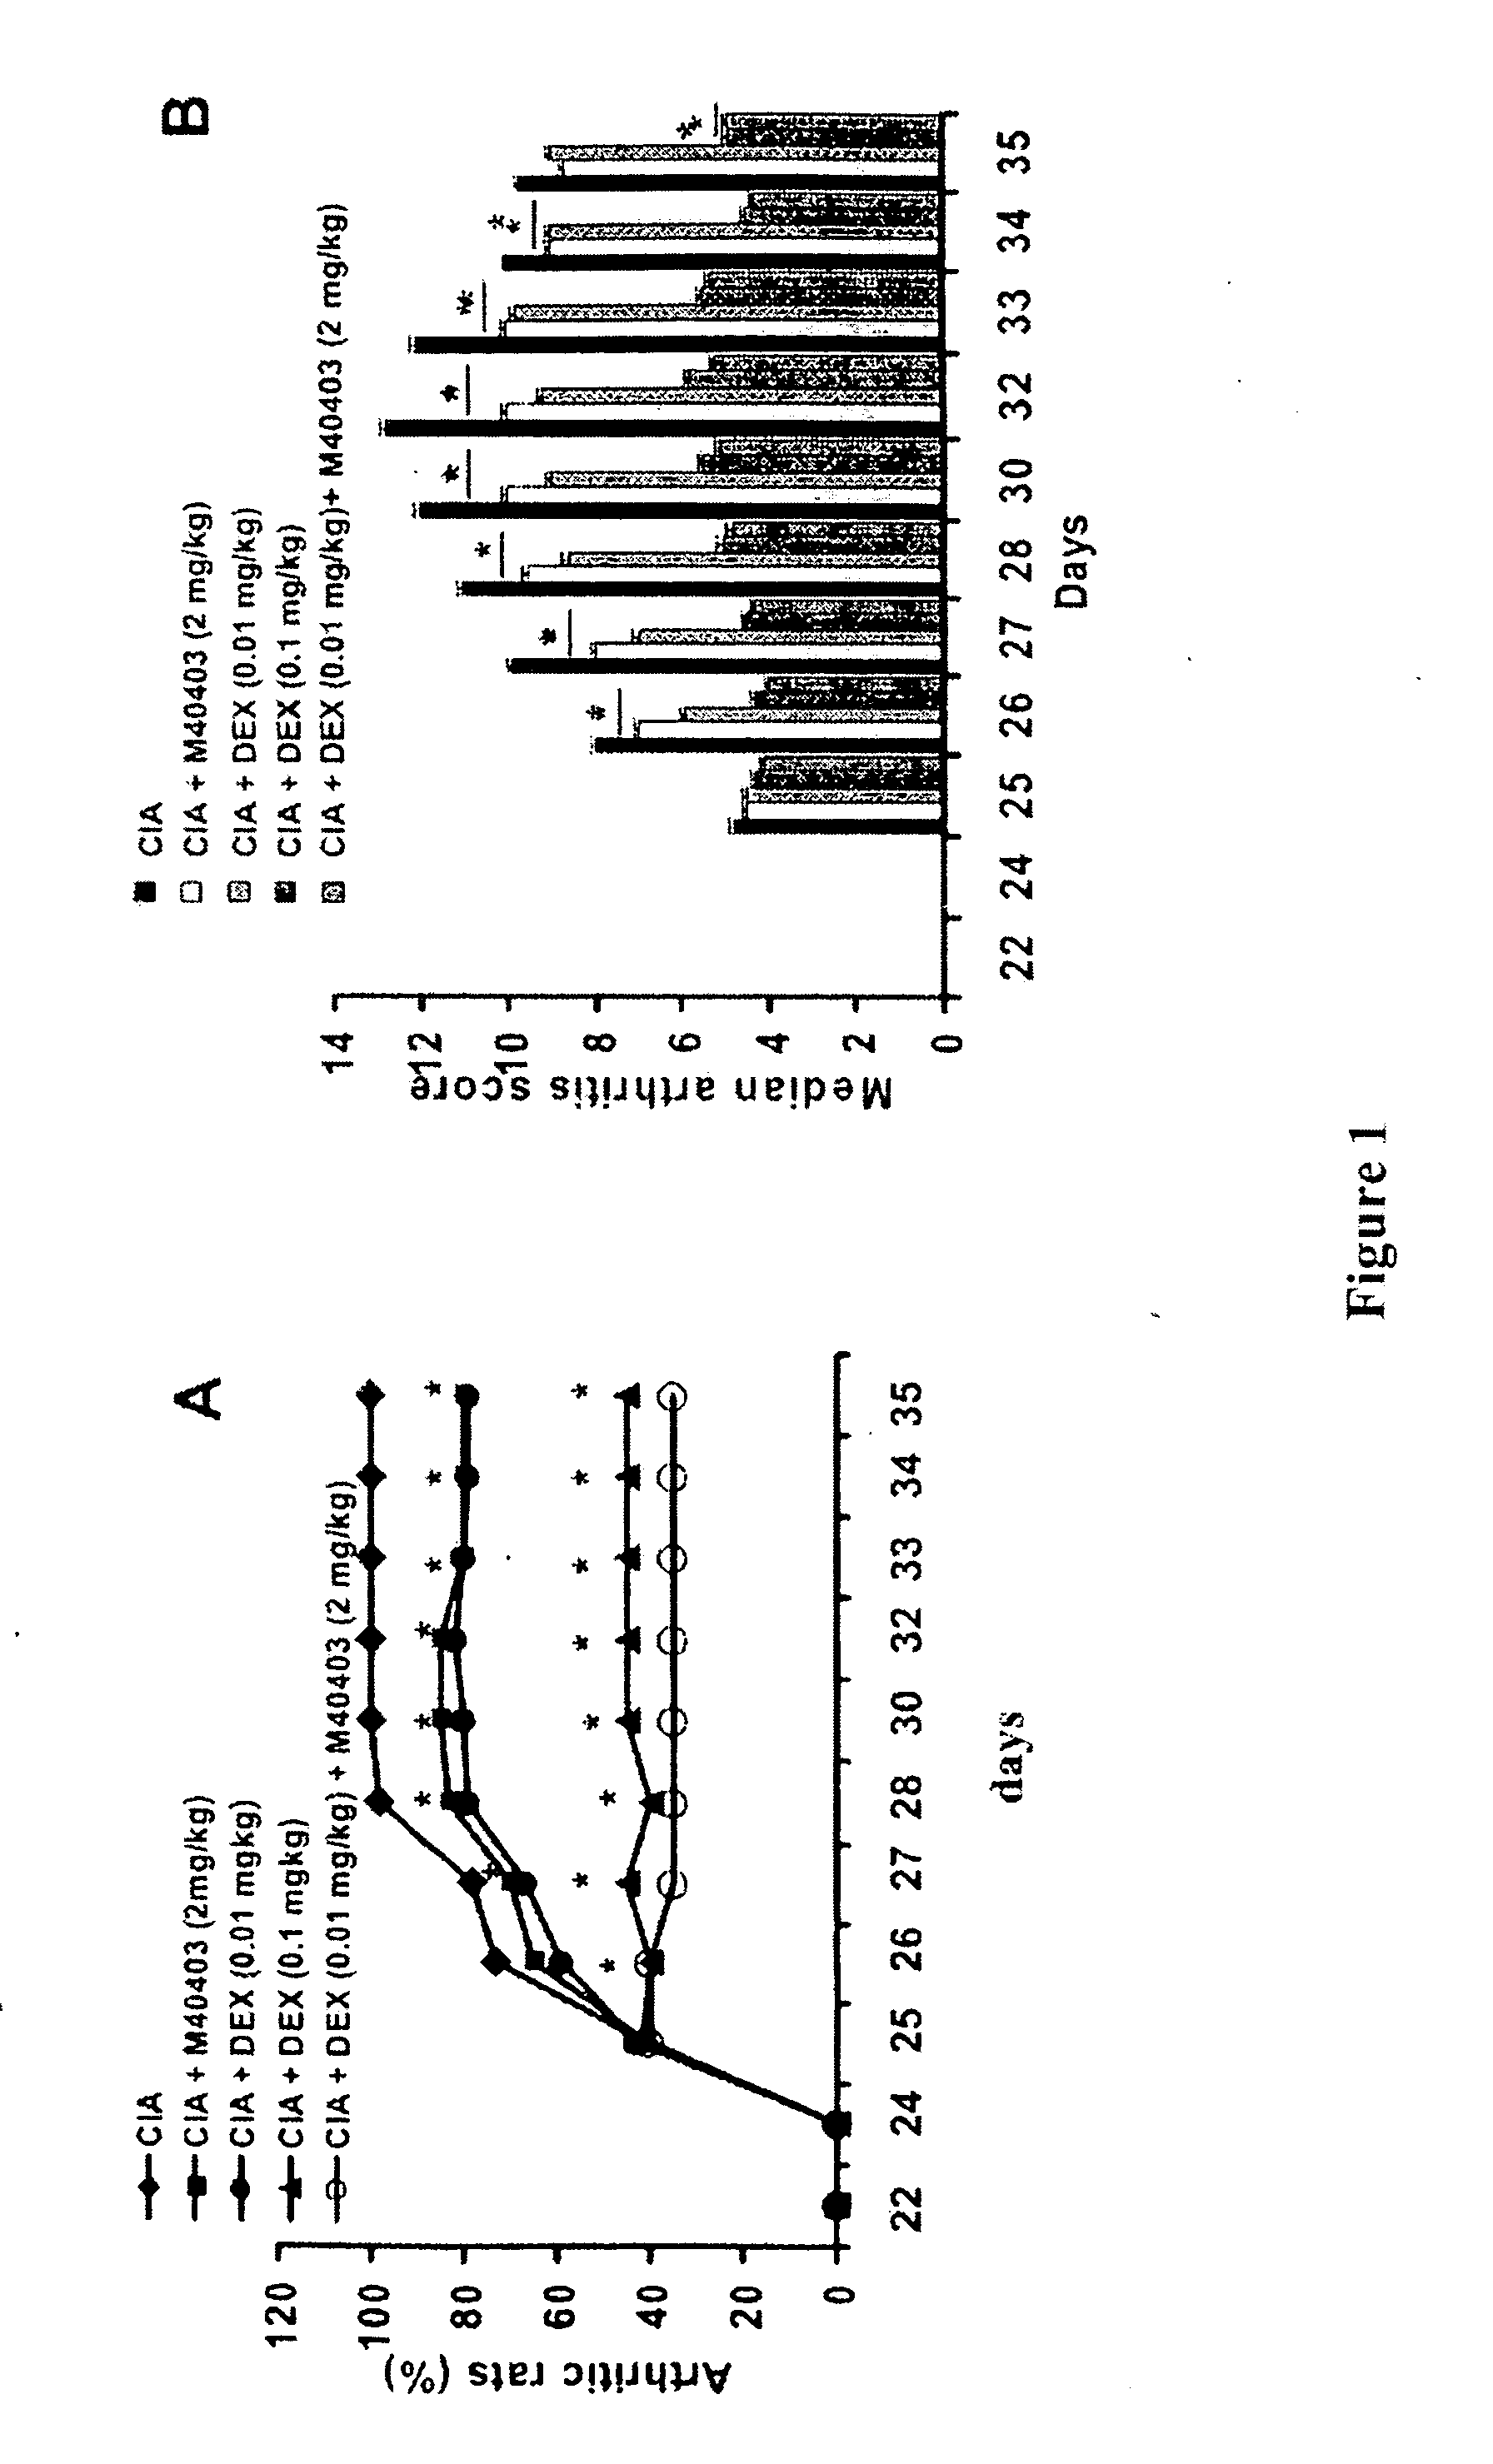 Combination therapy of an SODm and a corticosteroid for prevention and/or treatment of inflammatory bone or joint disease